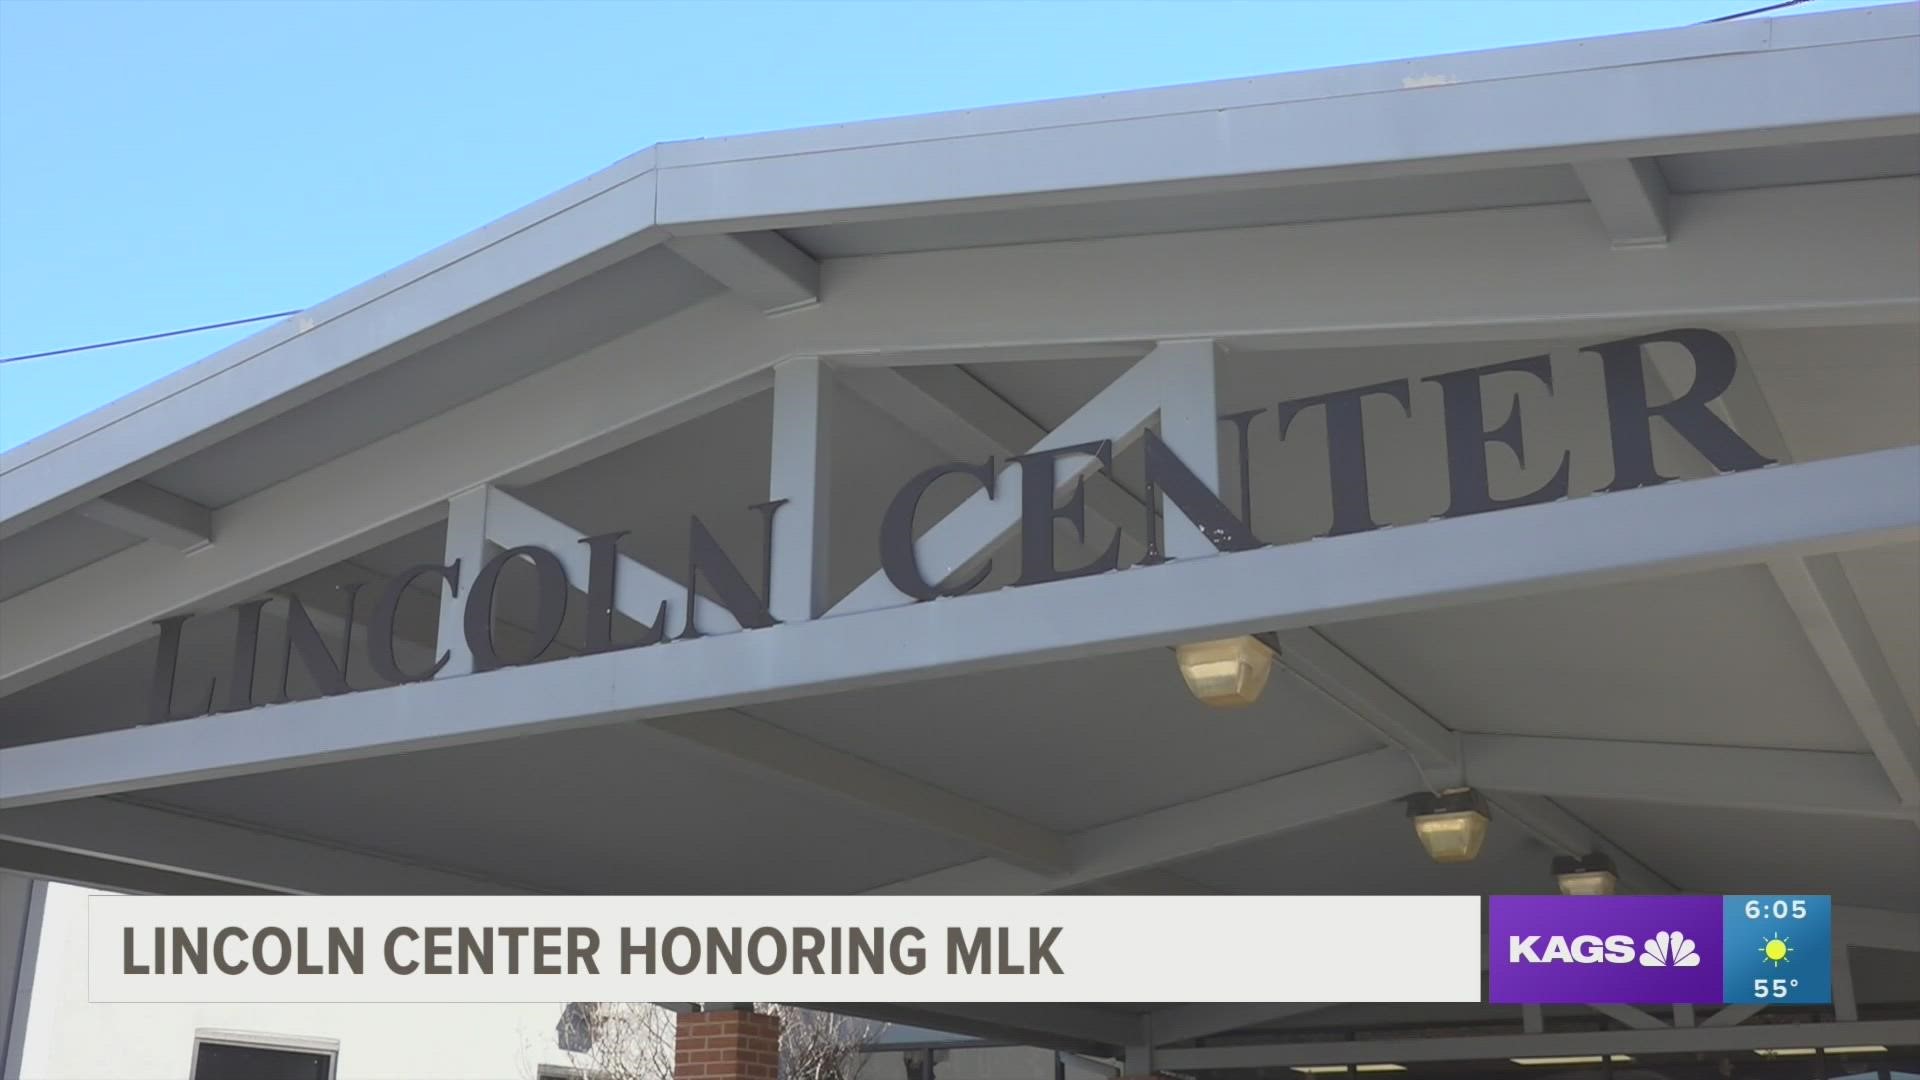 The Lincoln Recreation Center in College Station is kicking off a week of community events to honor Dr. Martin Luther King ahead of the holiday on Monday, Jan. 16.